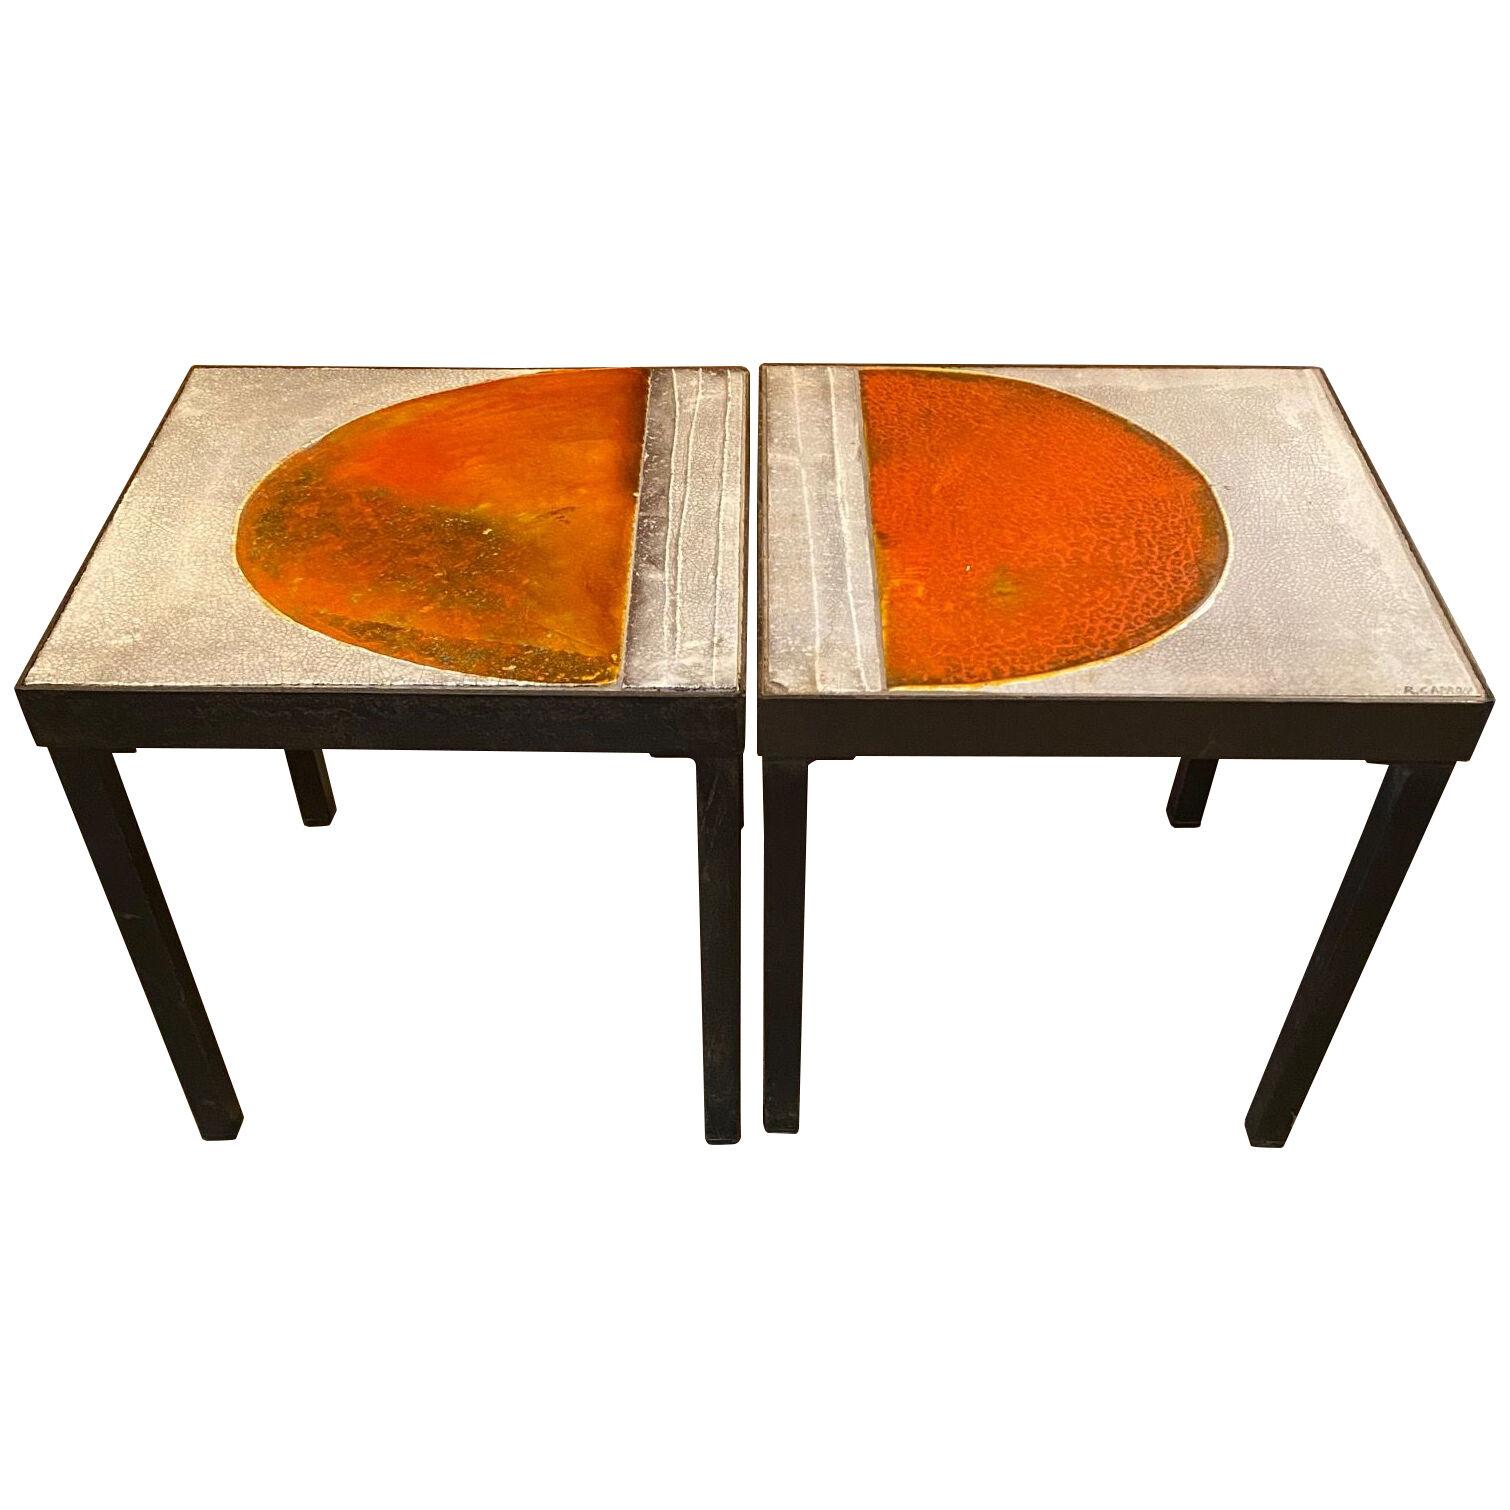 Pair of coffee tables /side tables by Roger Capron, France, 1960s